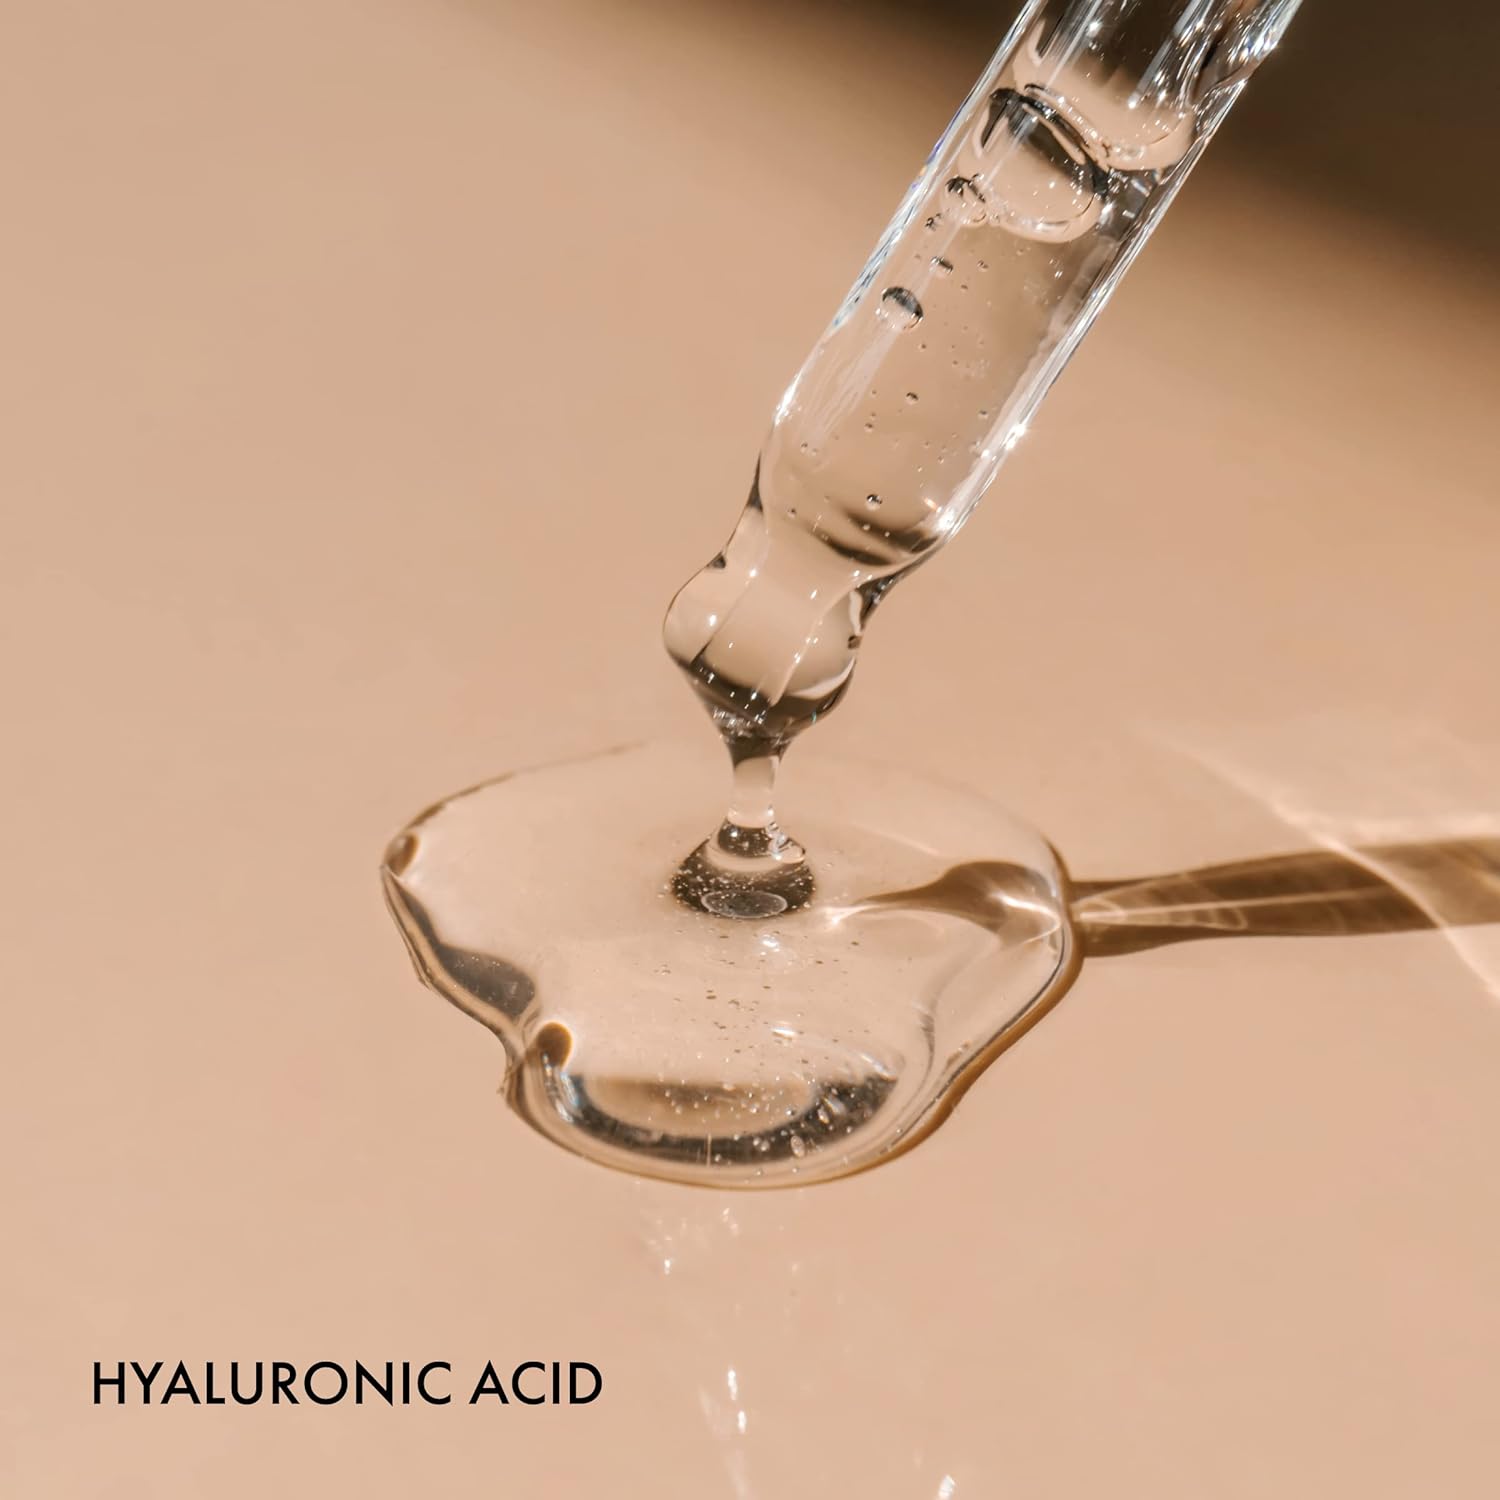 What is Hyaluronic Acid and its benefits?